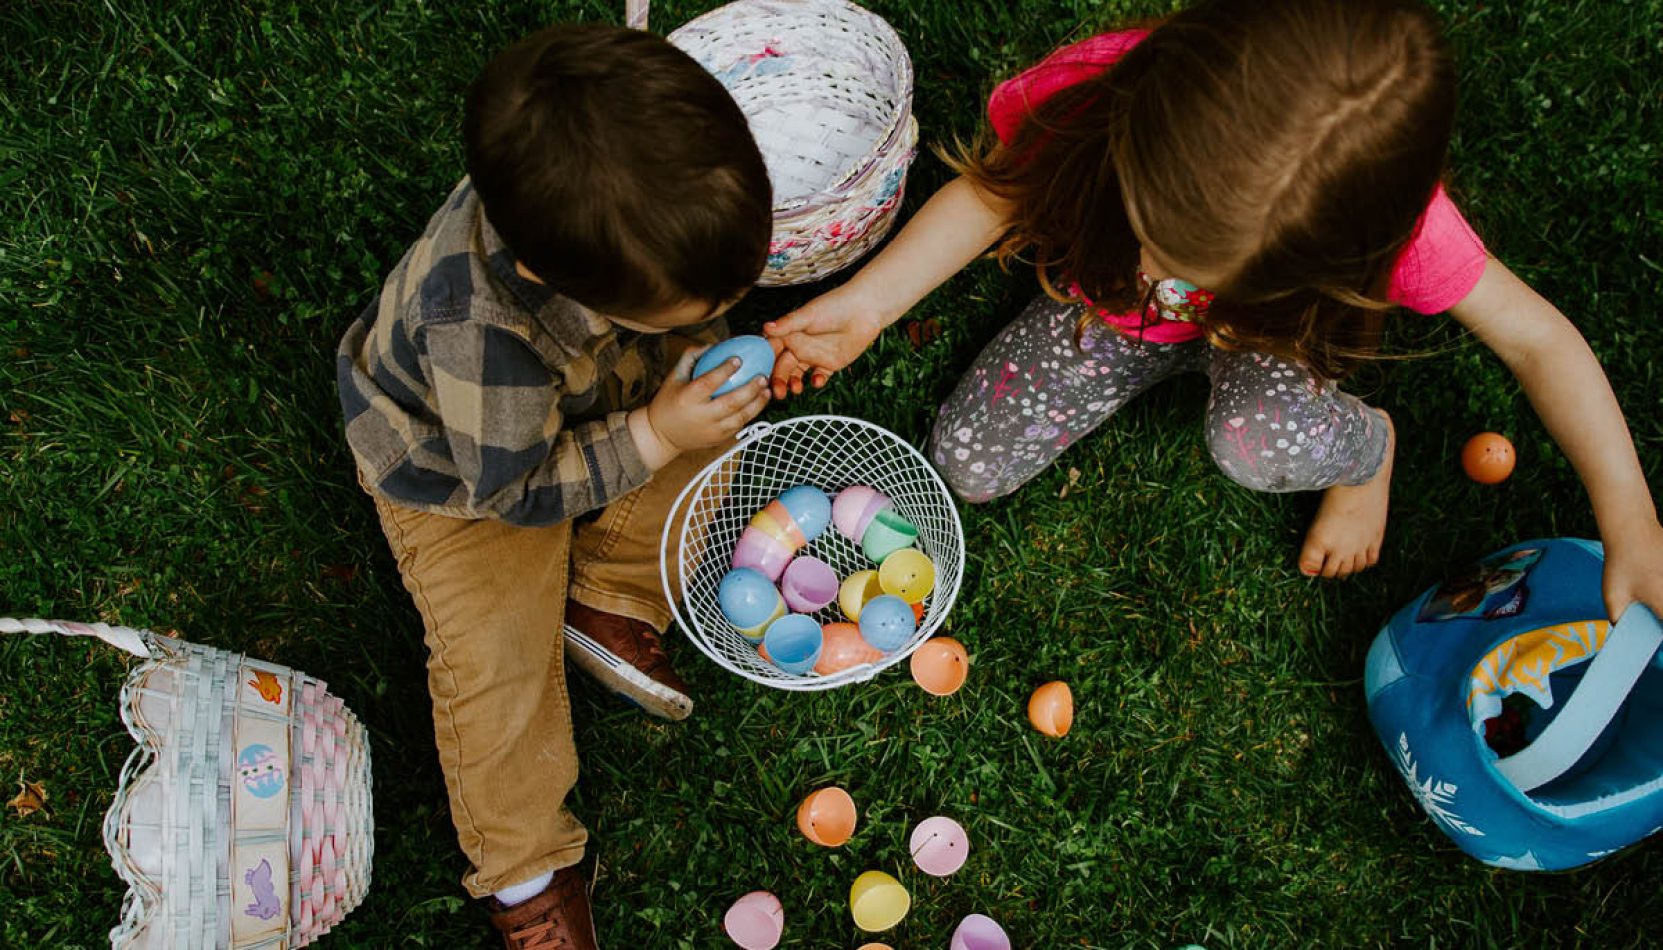 easter egg hunts, whats on, whats on this week,. whats on in surrey, guide to whats on, guide to surrey, family, entertainment, sports, food, days out, nights out, april 2022, guide to guildford, guide to farnham, guide to woking, guide to kingston, guide to farnham, guide to family days out in surrey, guide to going out, the guide to surrey